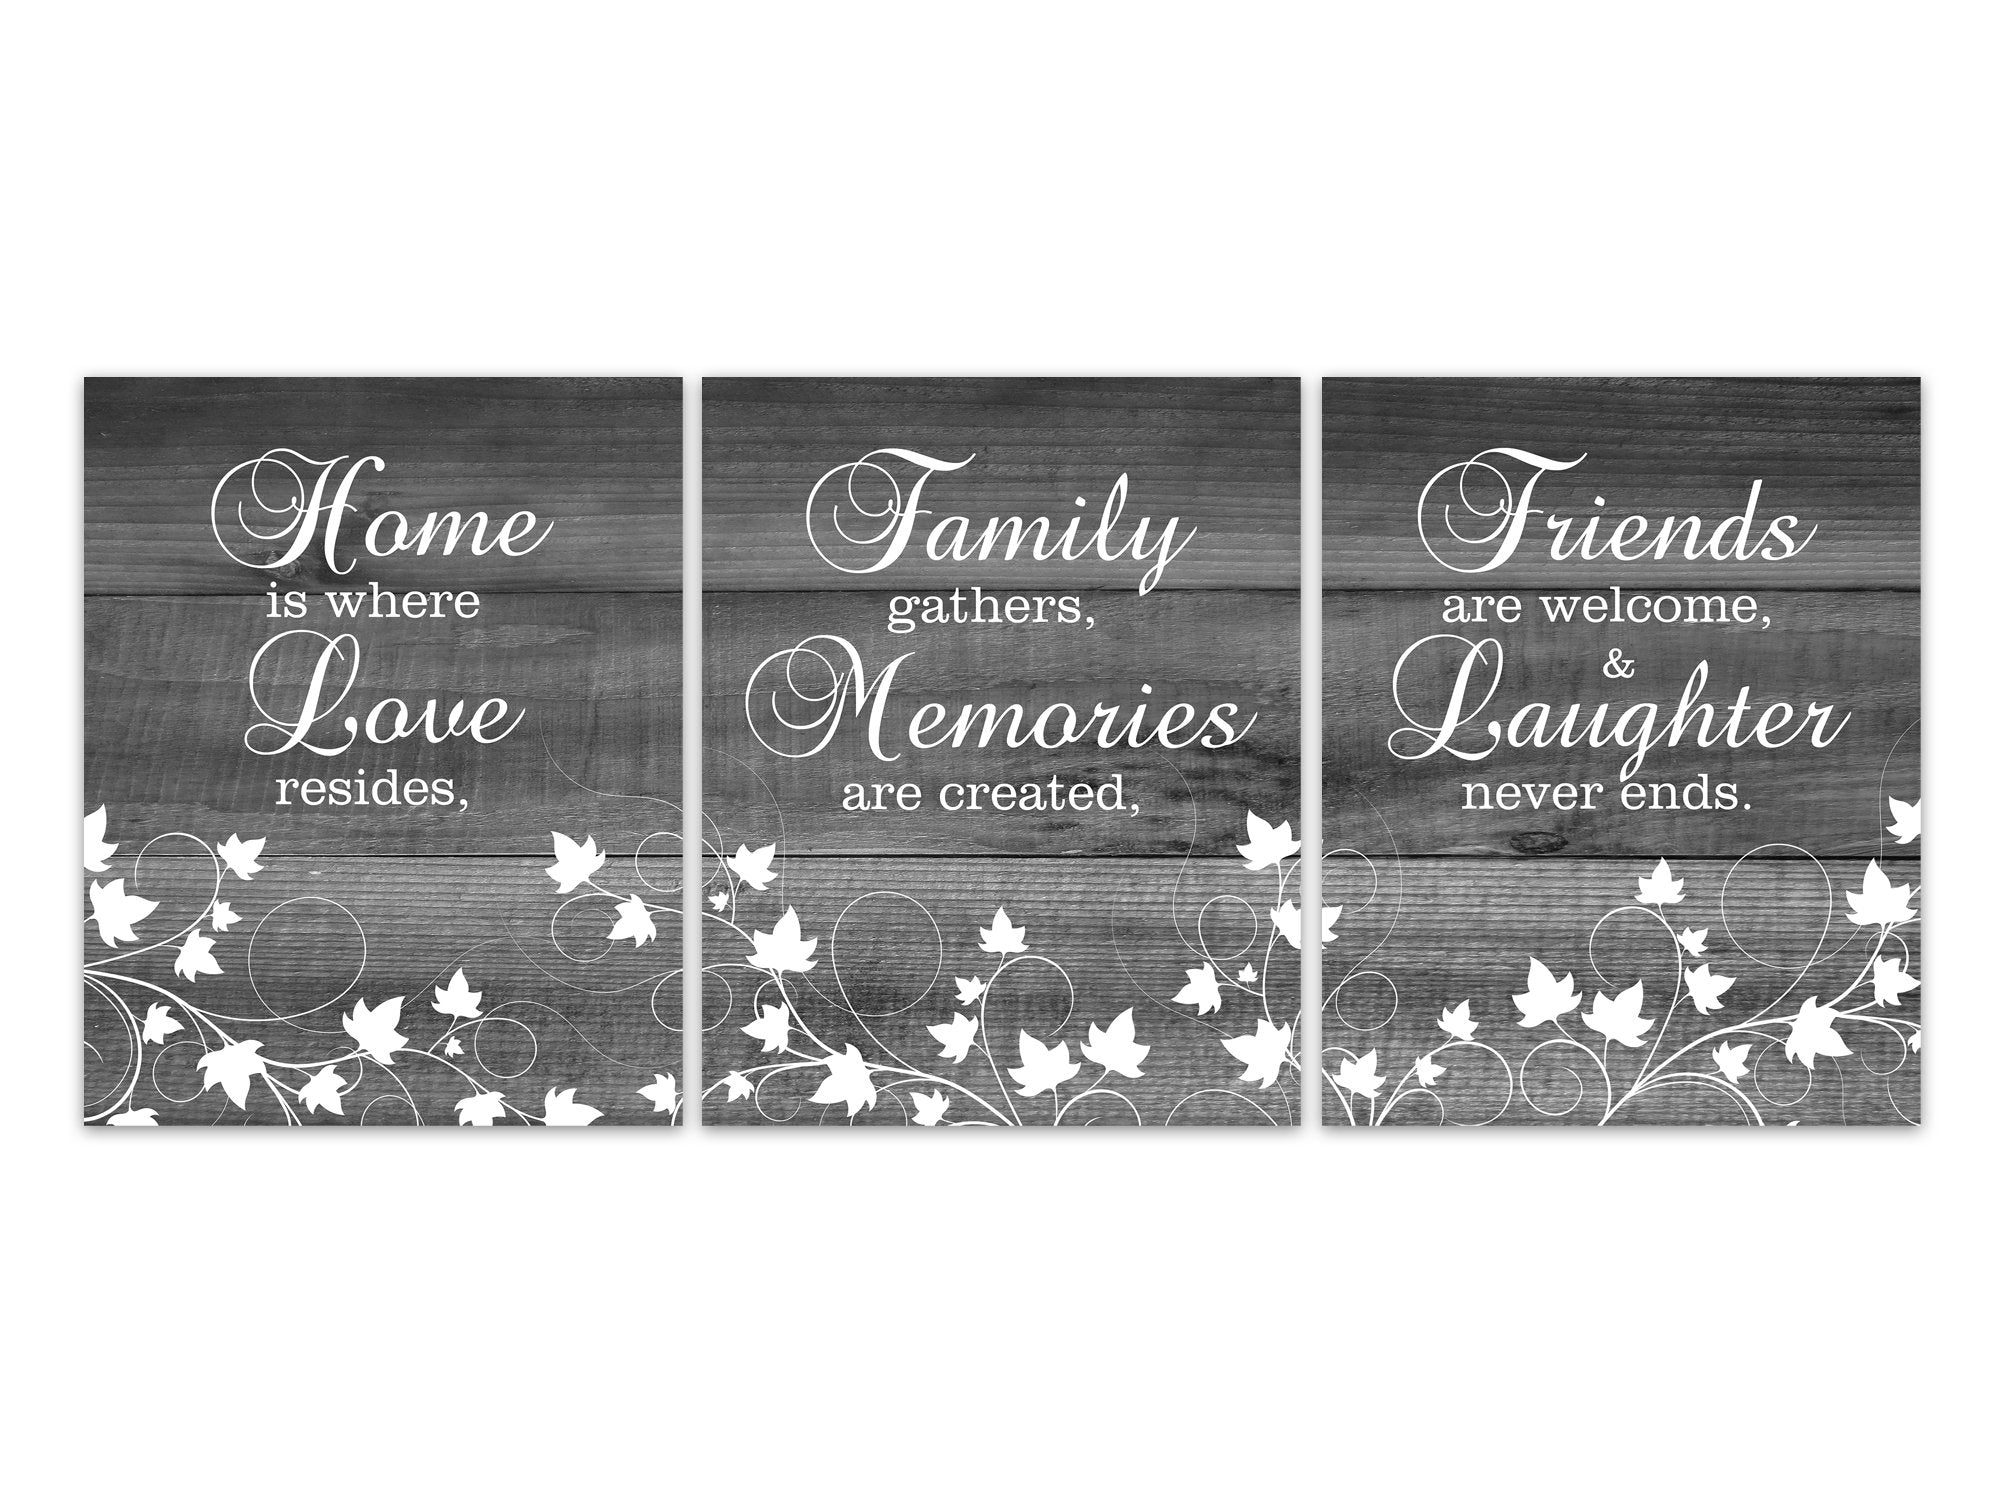 Rustic Decor CANVAS, Home is Where Love Resides, Friends and Laughter, Family Gathers, Family Quote Wall Art Prints, Gray Kitchen - HOME436